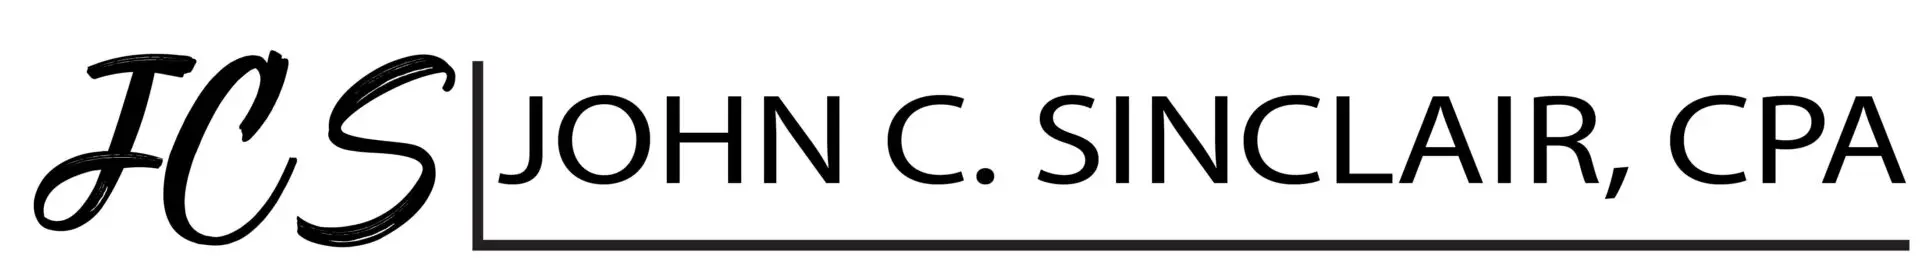 A black and white logo of the n. C. S.